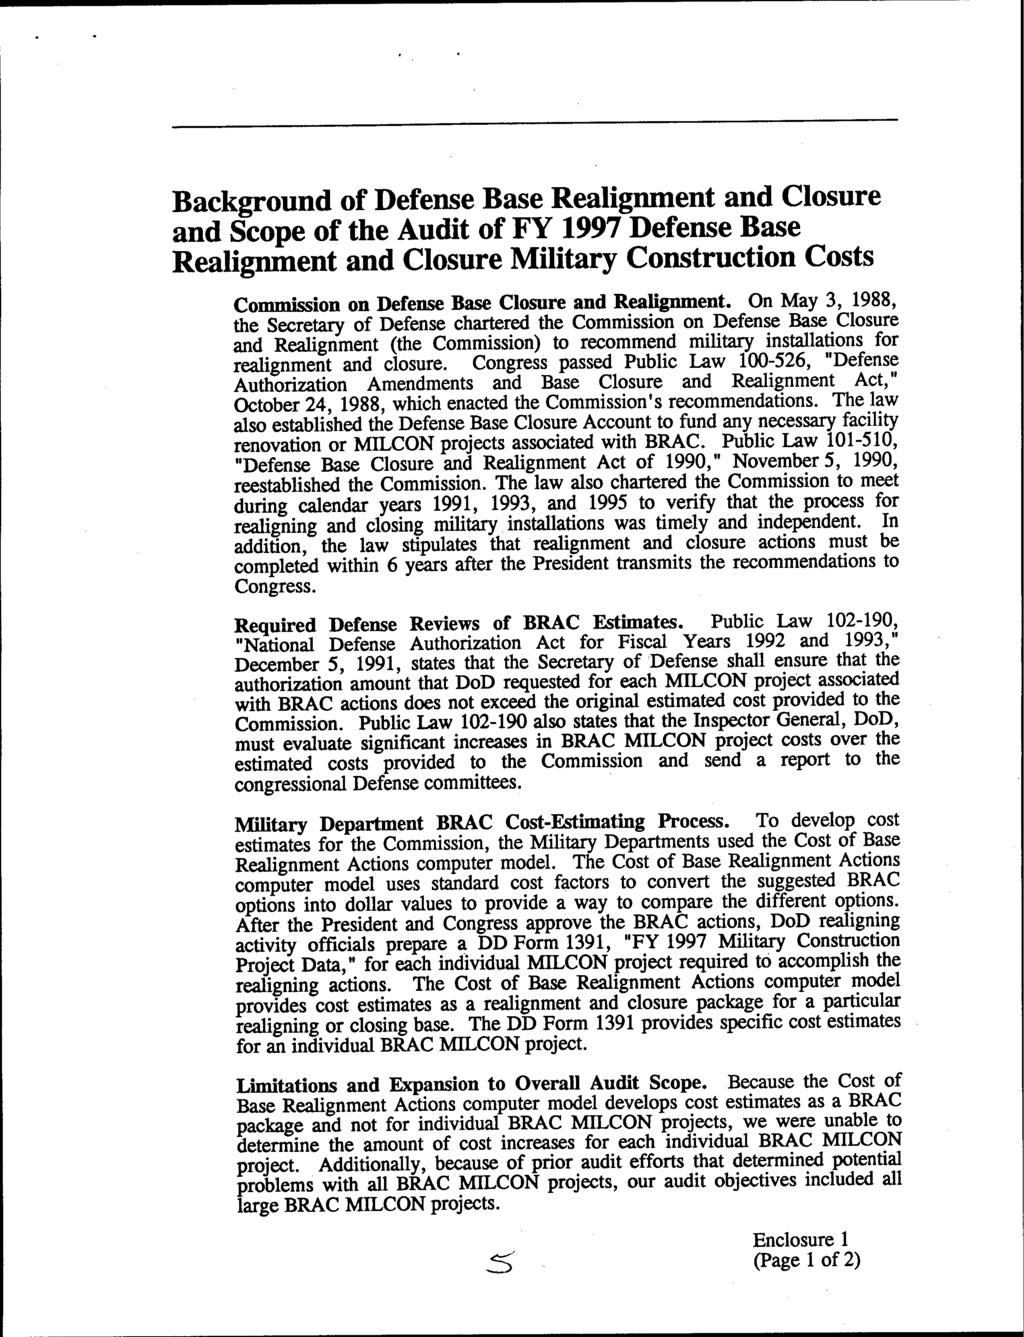 Background of Defense Base Realignment and Closure and Scope of the Audit of FY 1997 Defense Base Realignment and Closure Military Construction Costs Commission on Defense Base Closure and